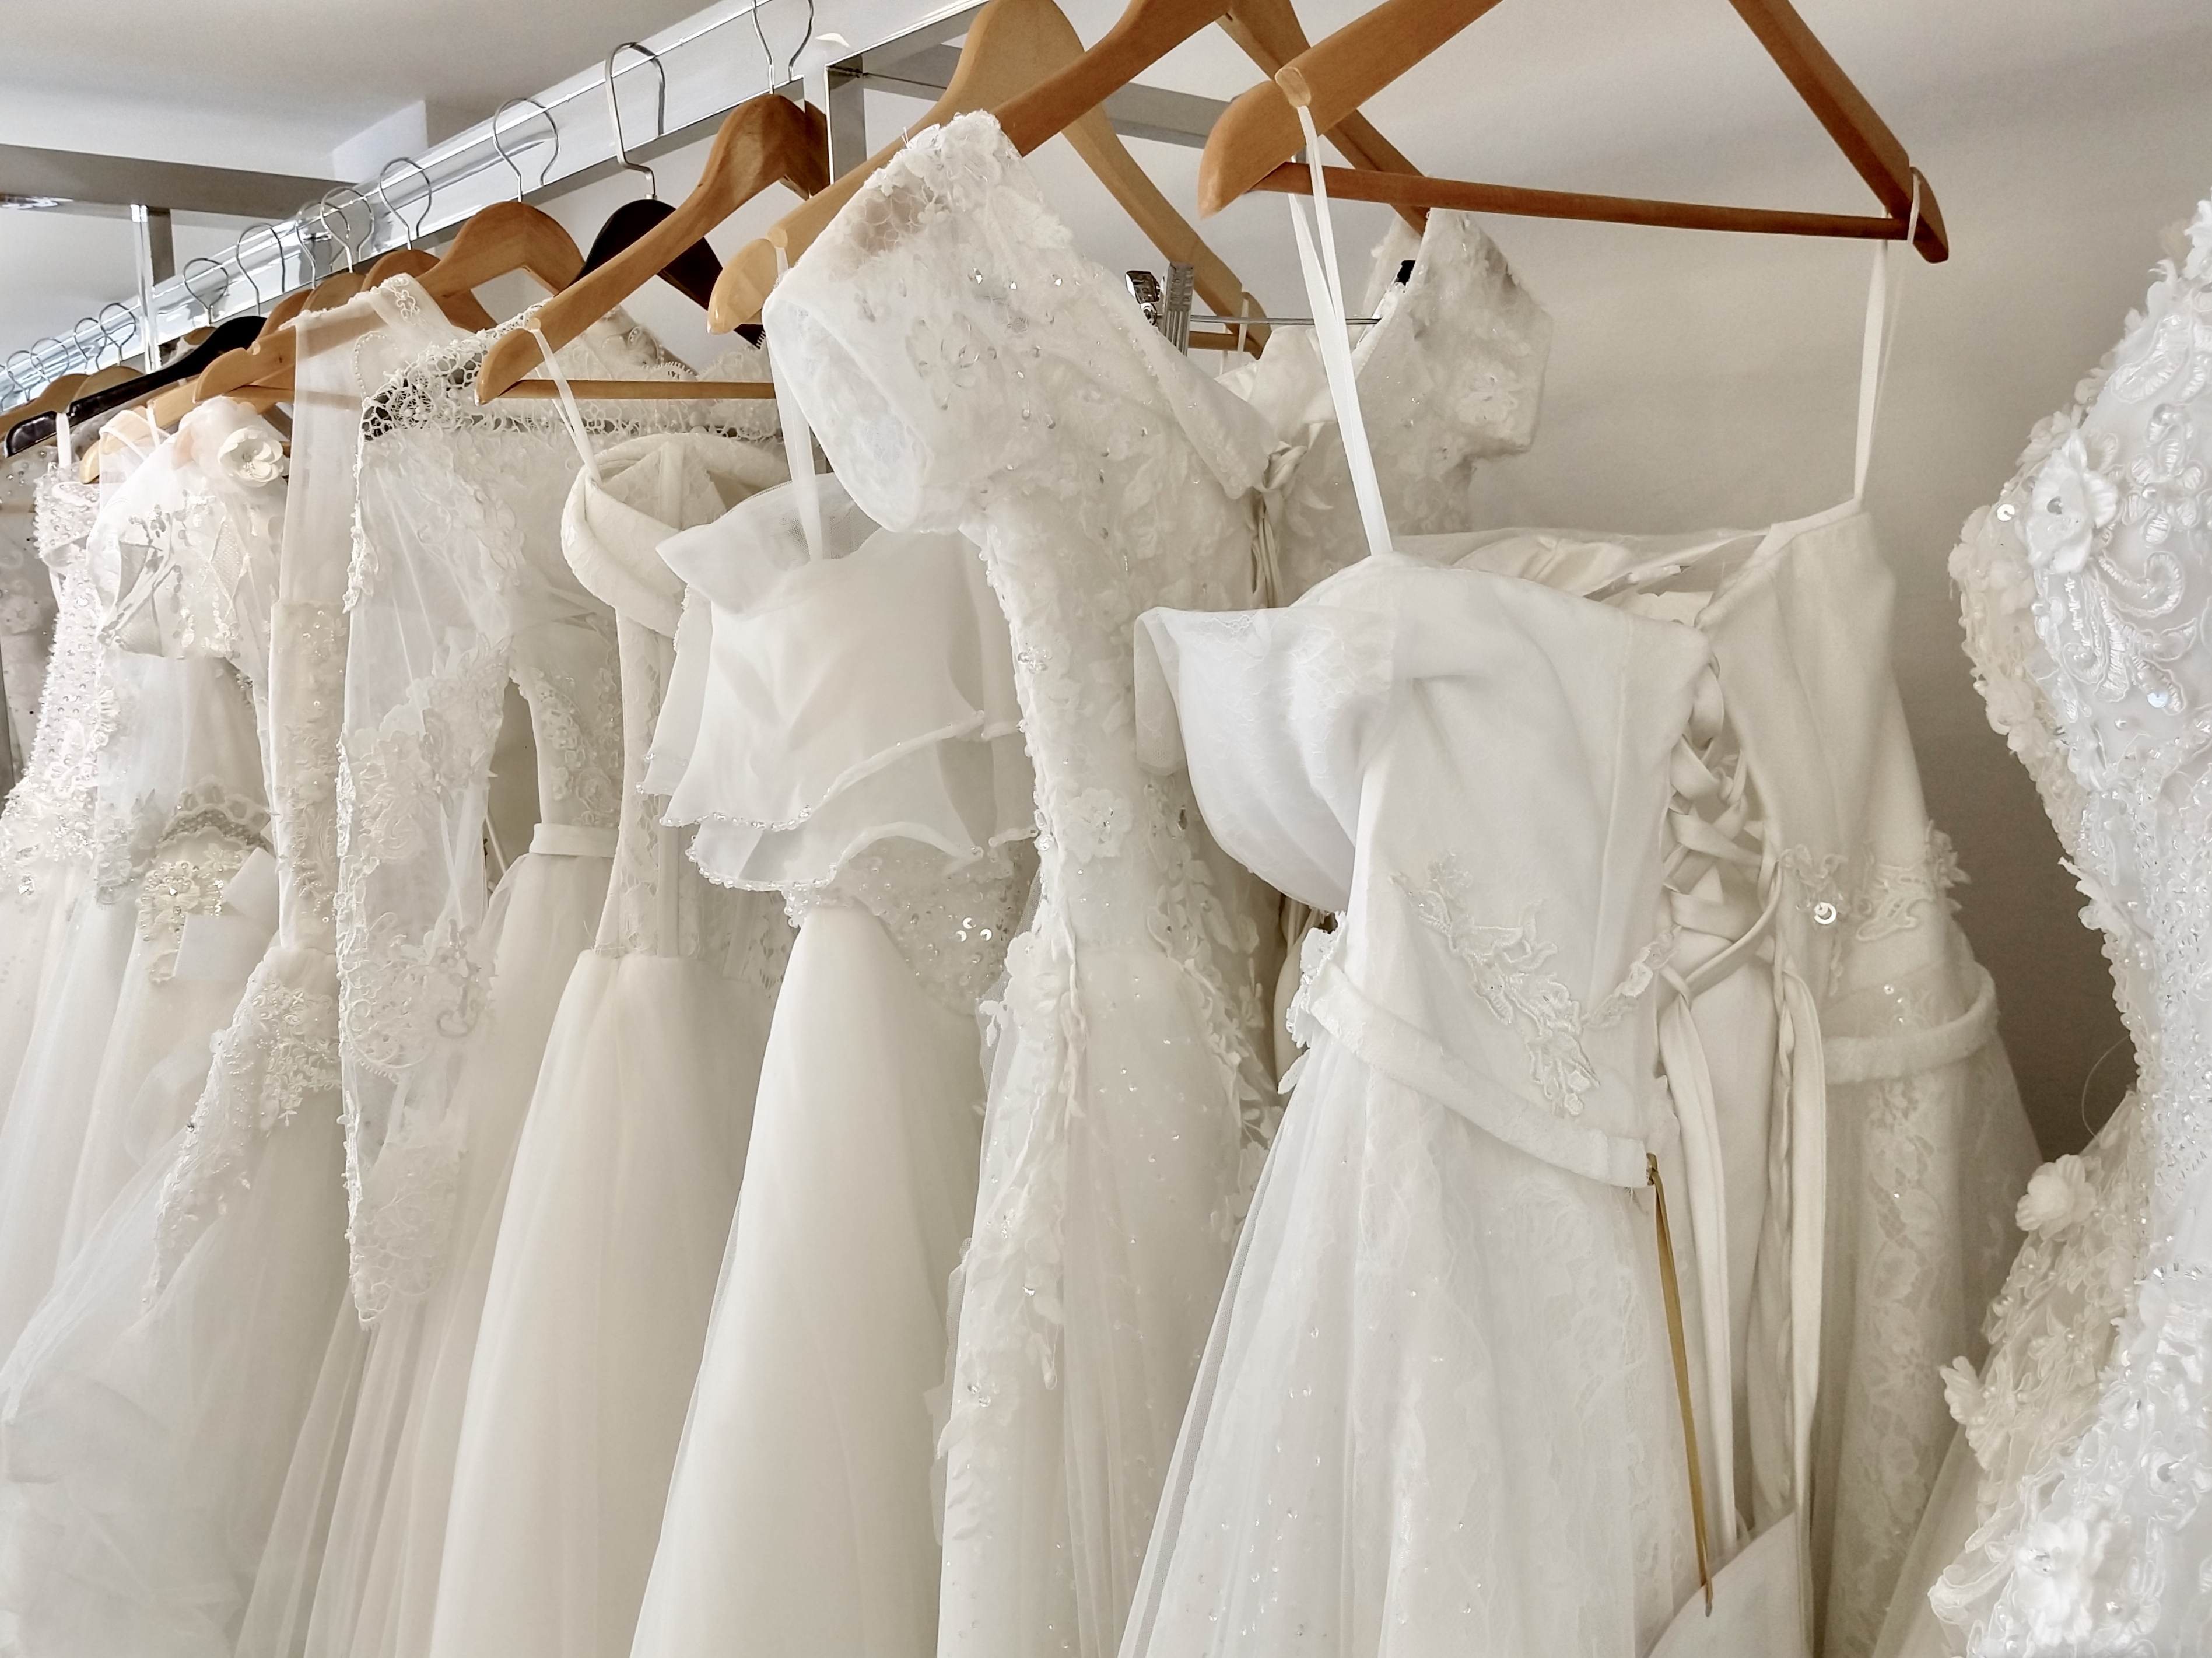 Wedding dresses on rack | Source: Getty Images